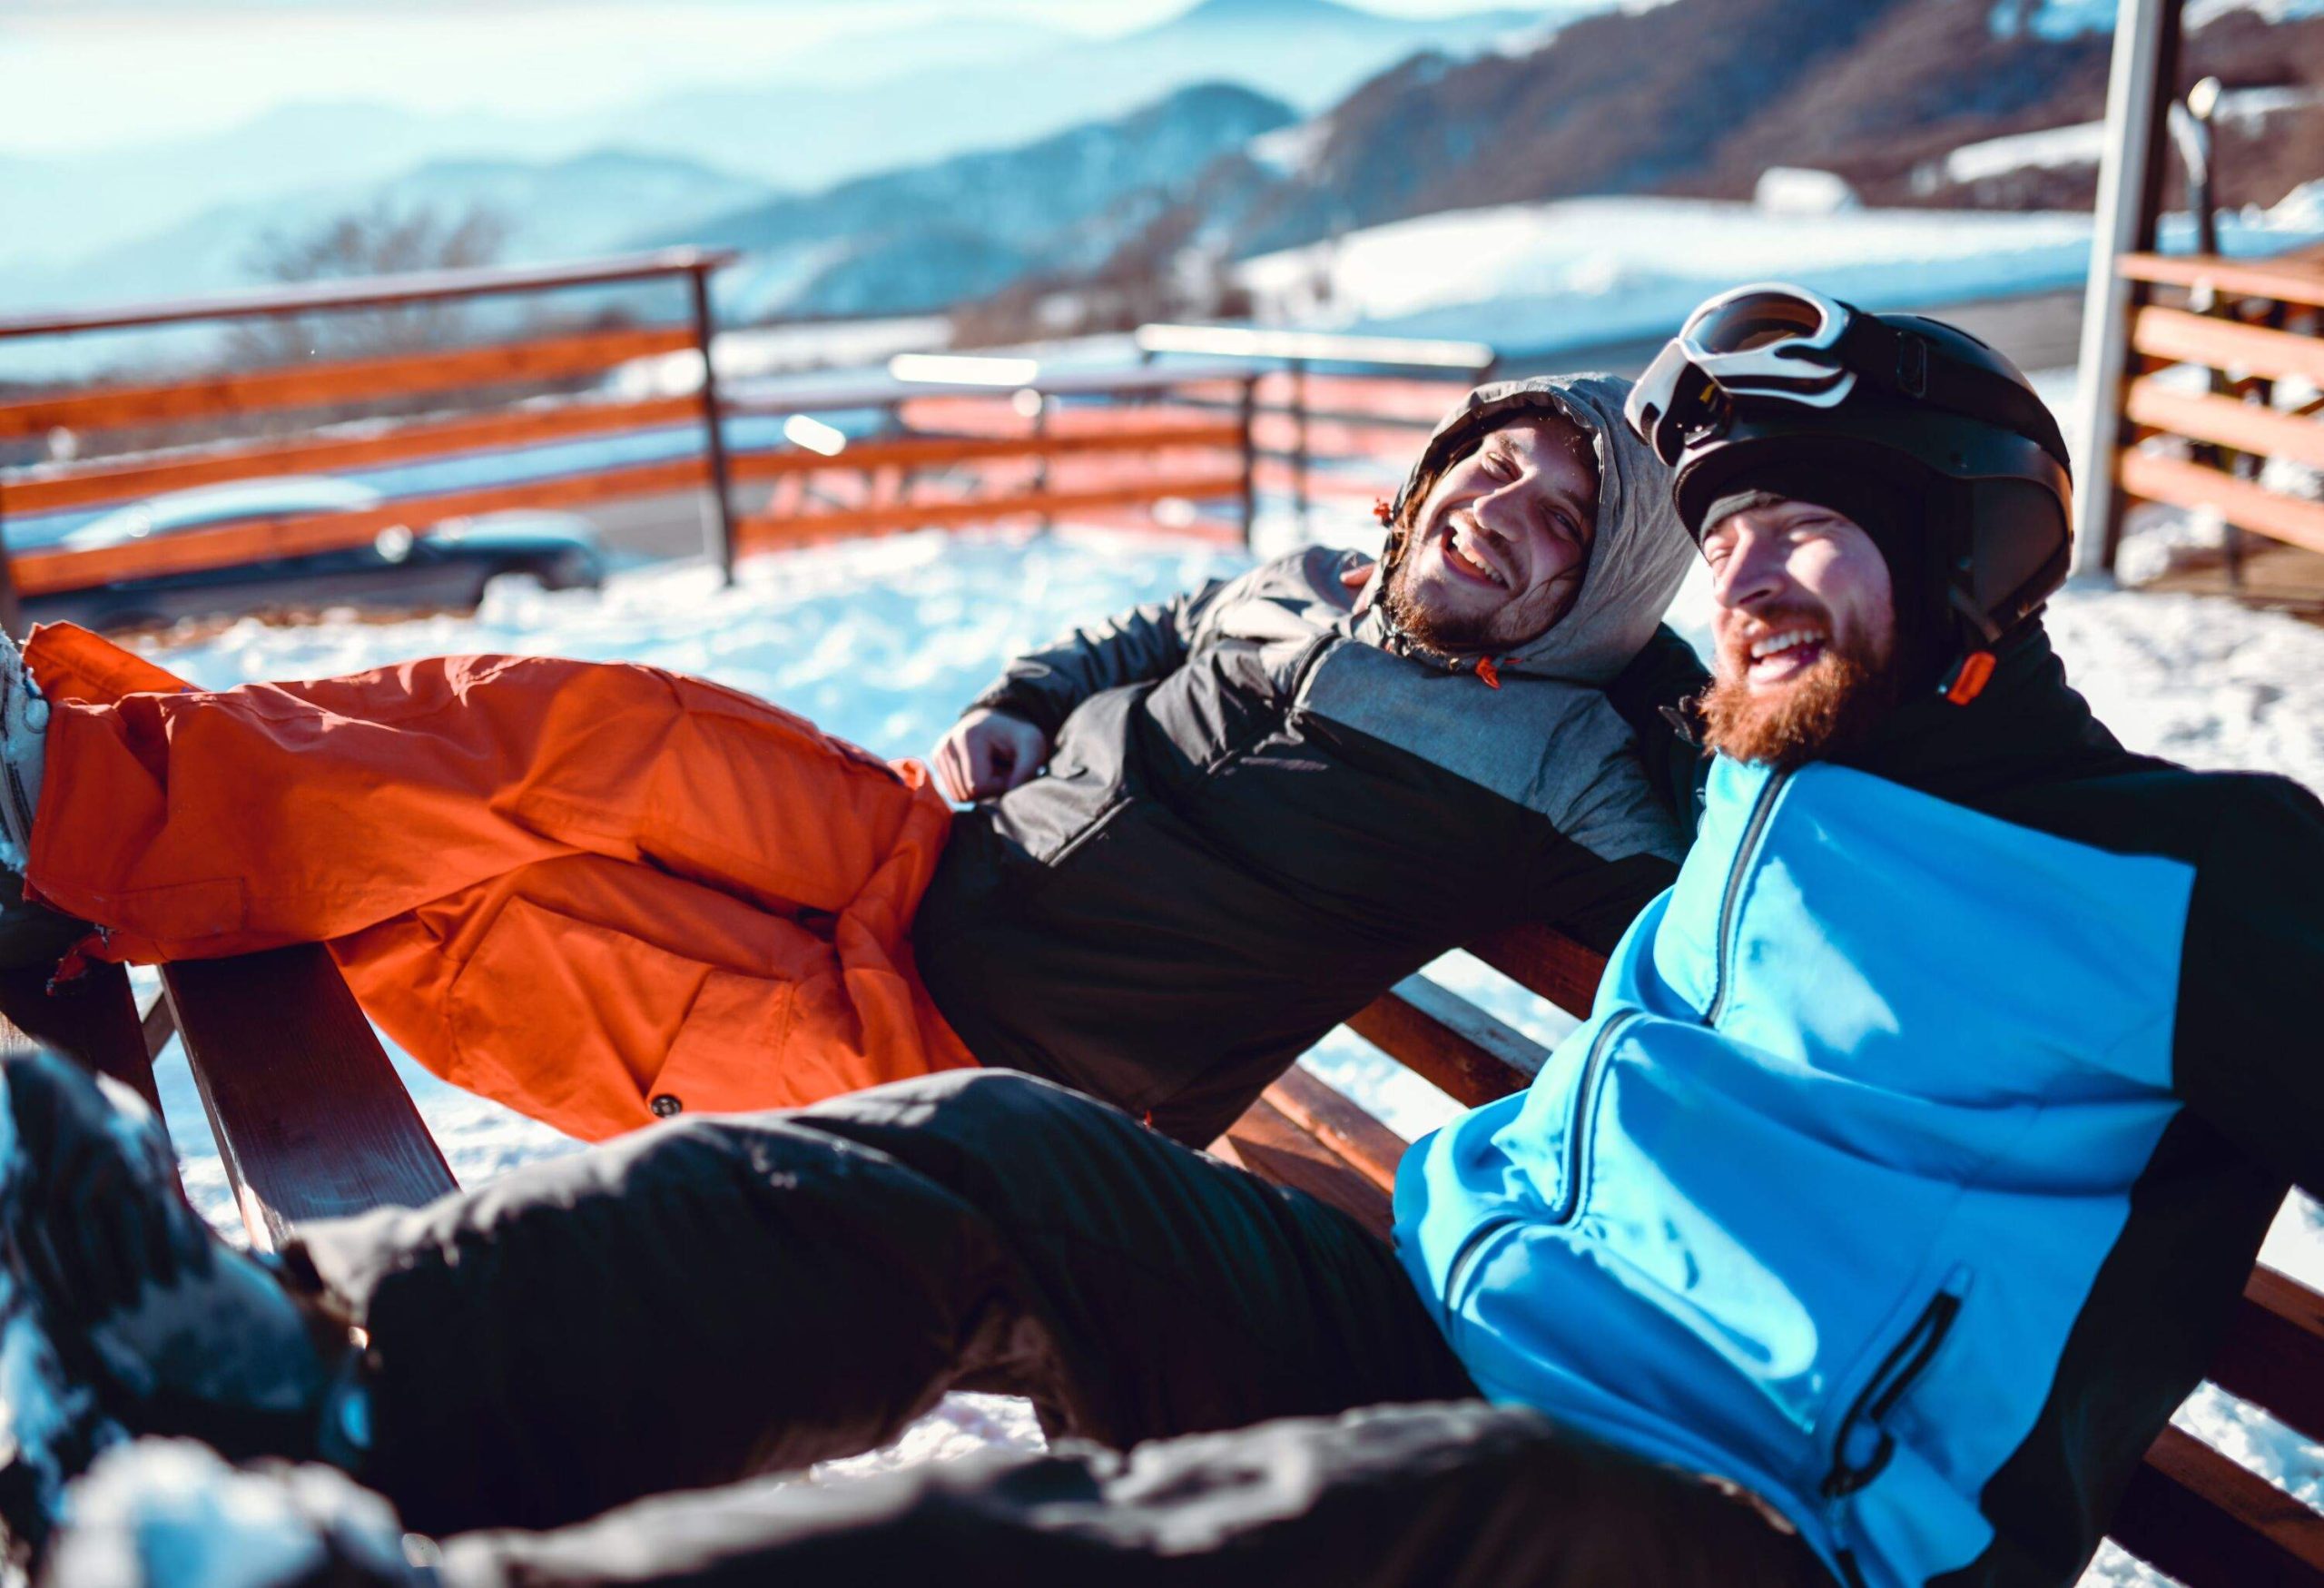 Gay Couple Embracing After Skiing On Mountain